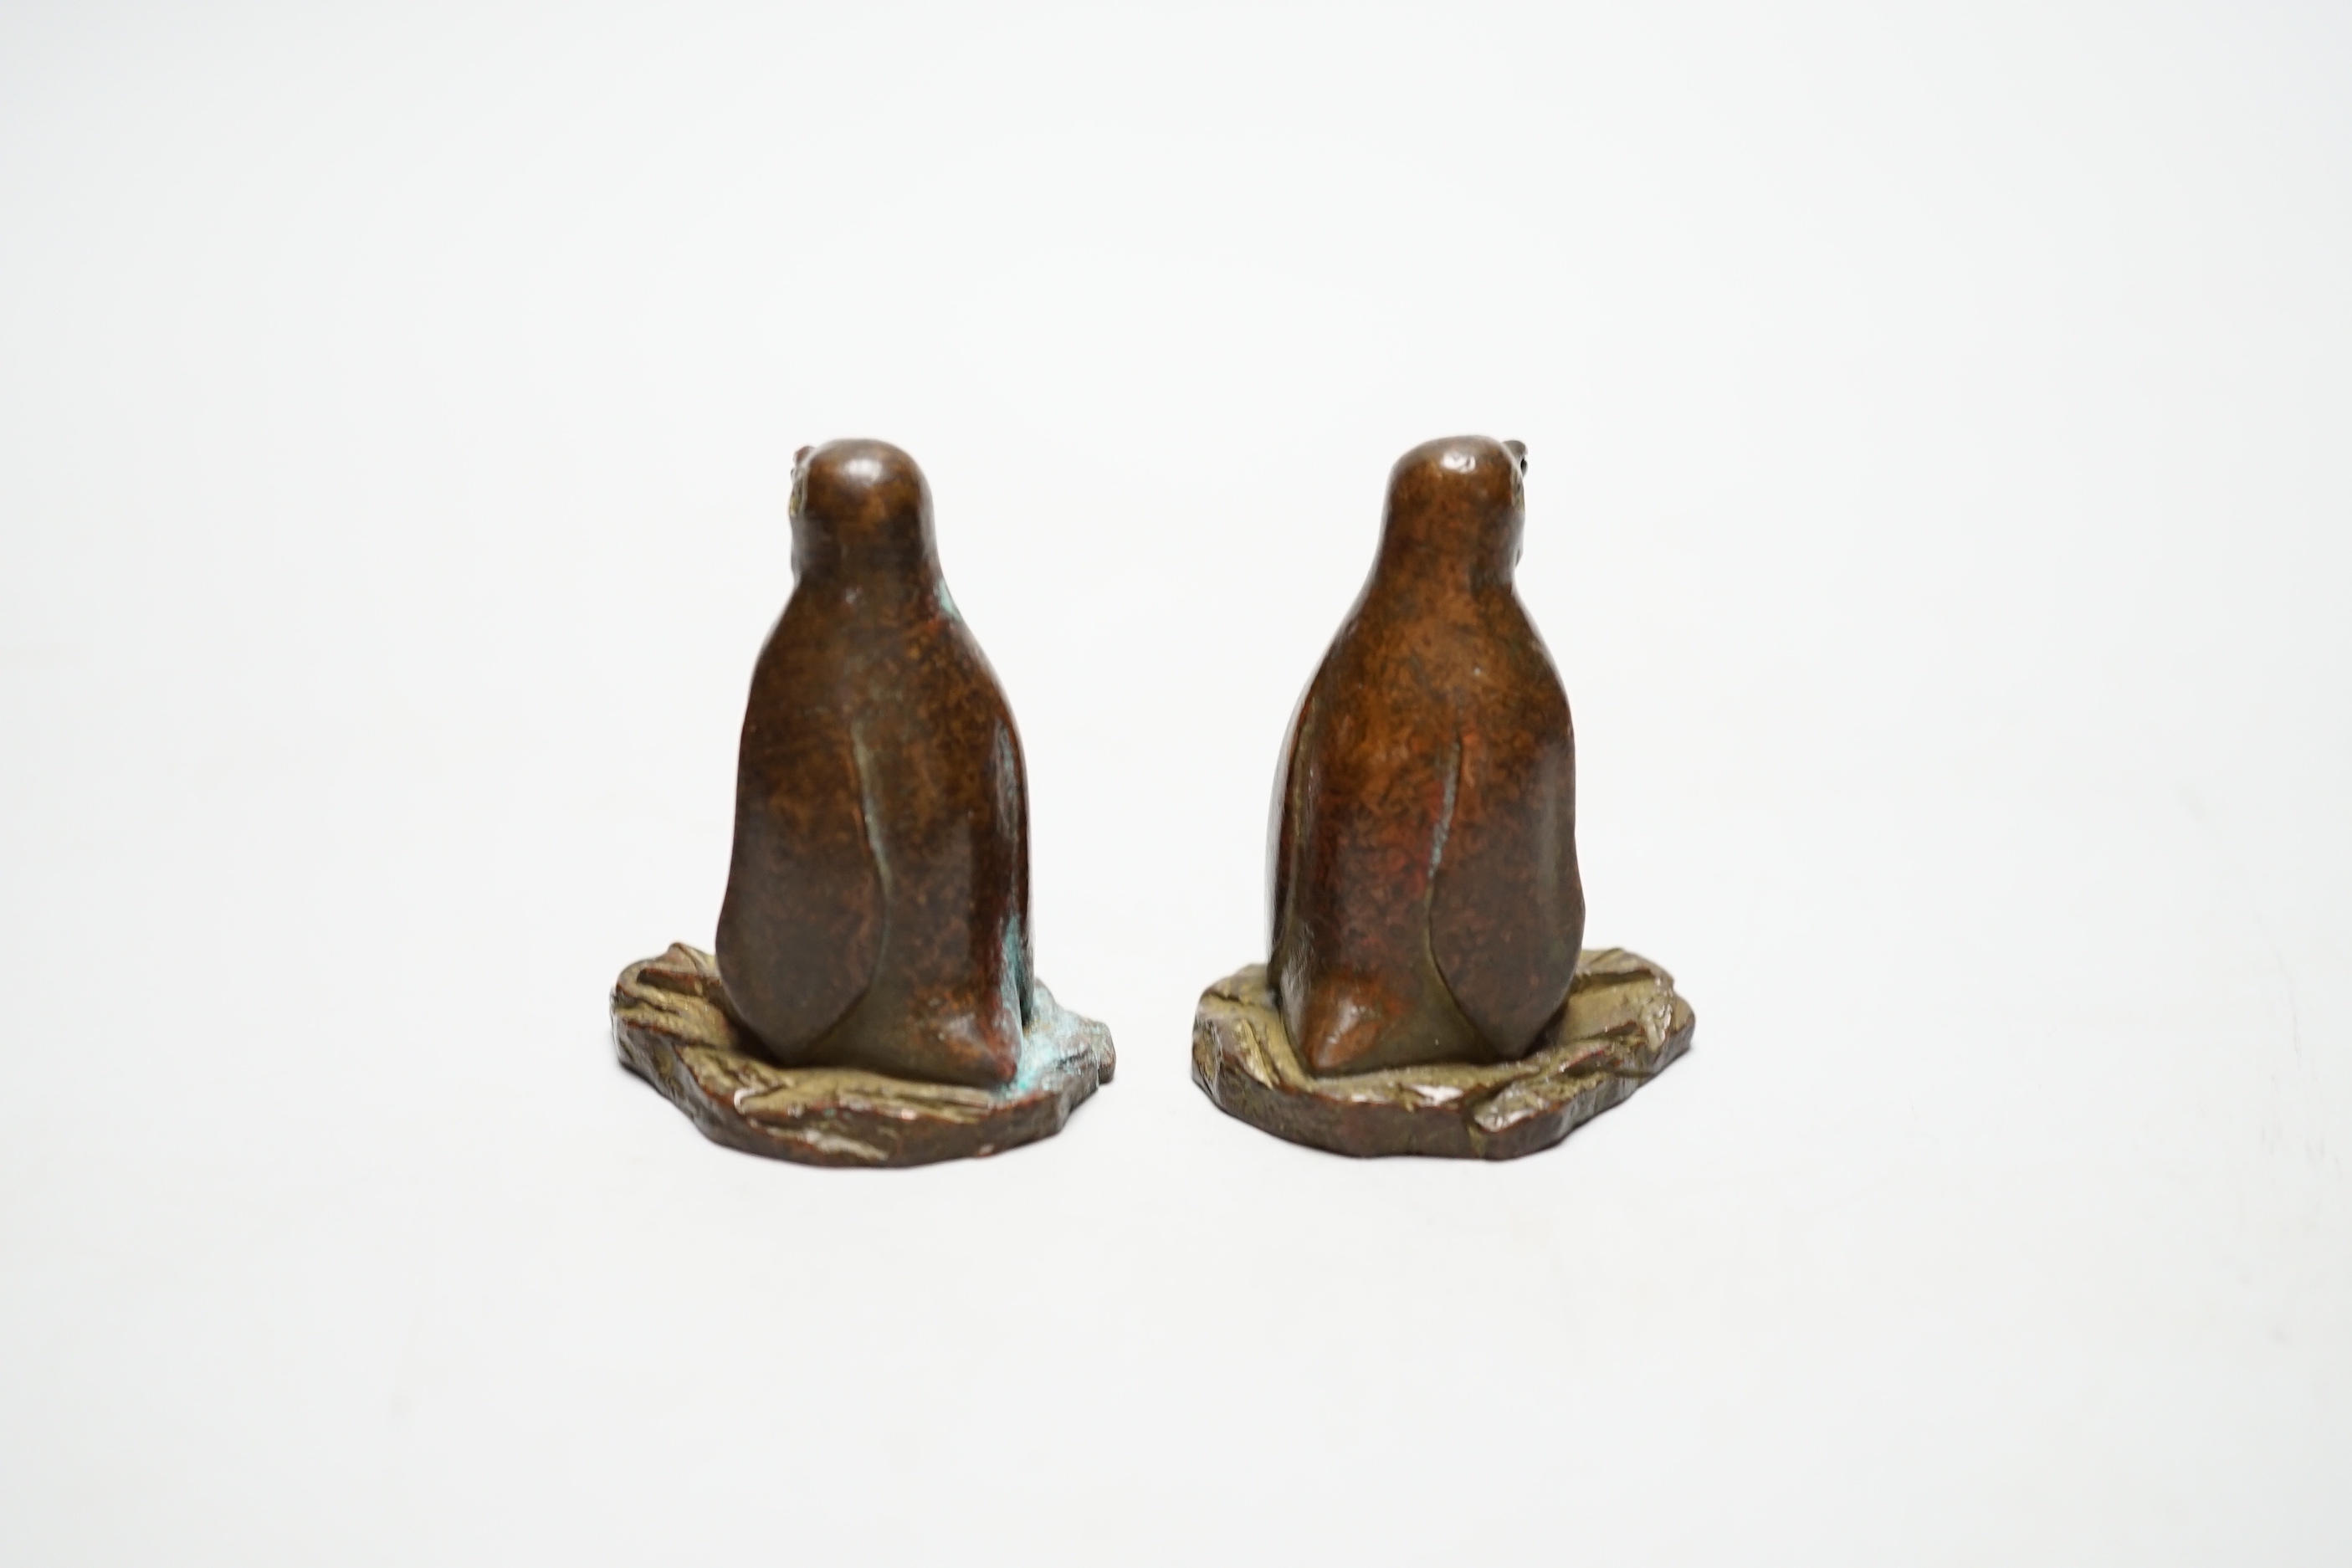 A pair of Chinese bronze models of penguins, 5cm